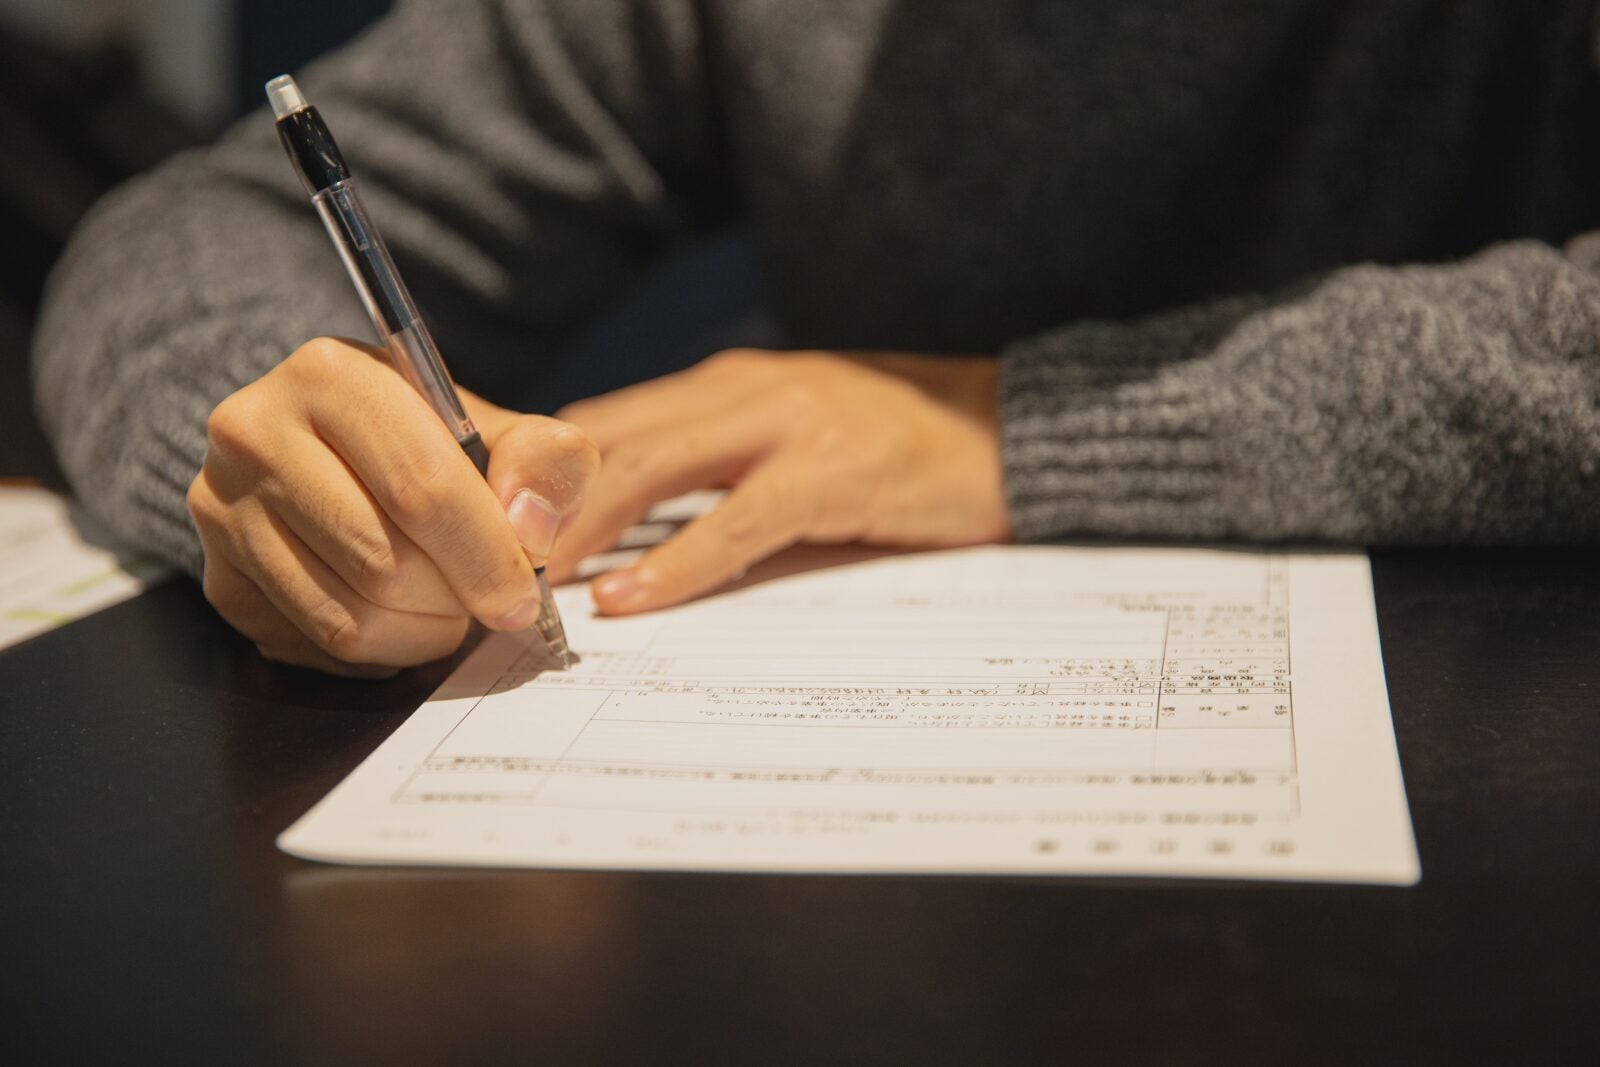 cropped of a person wearing a grey sweater, holding a pen and filling a form.